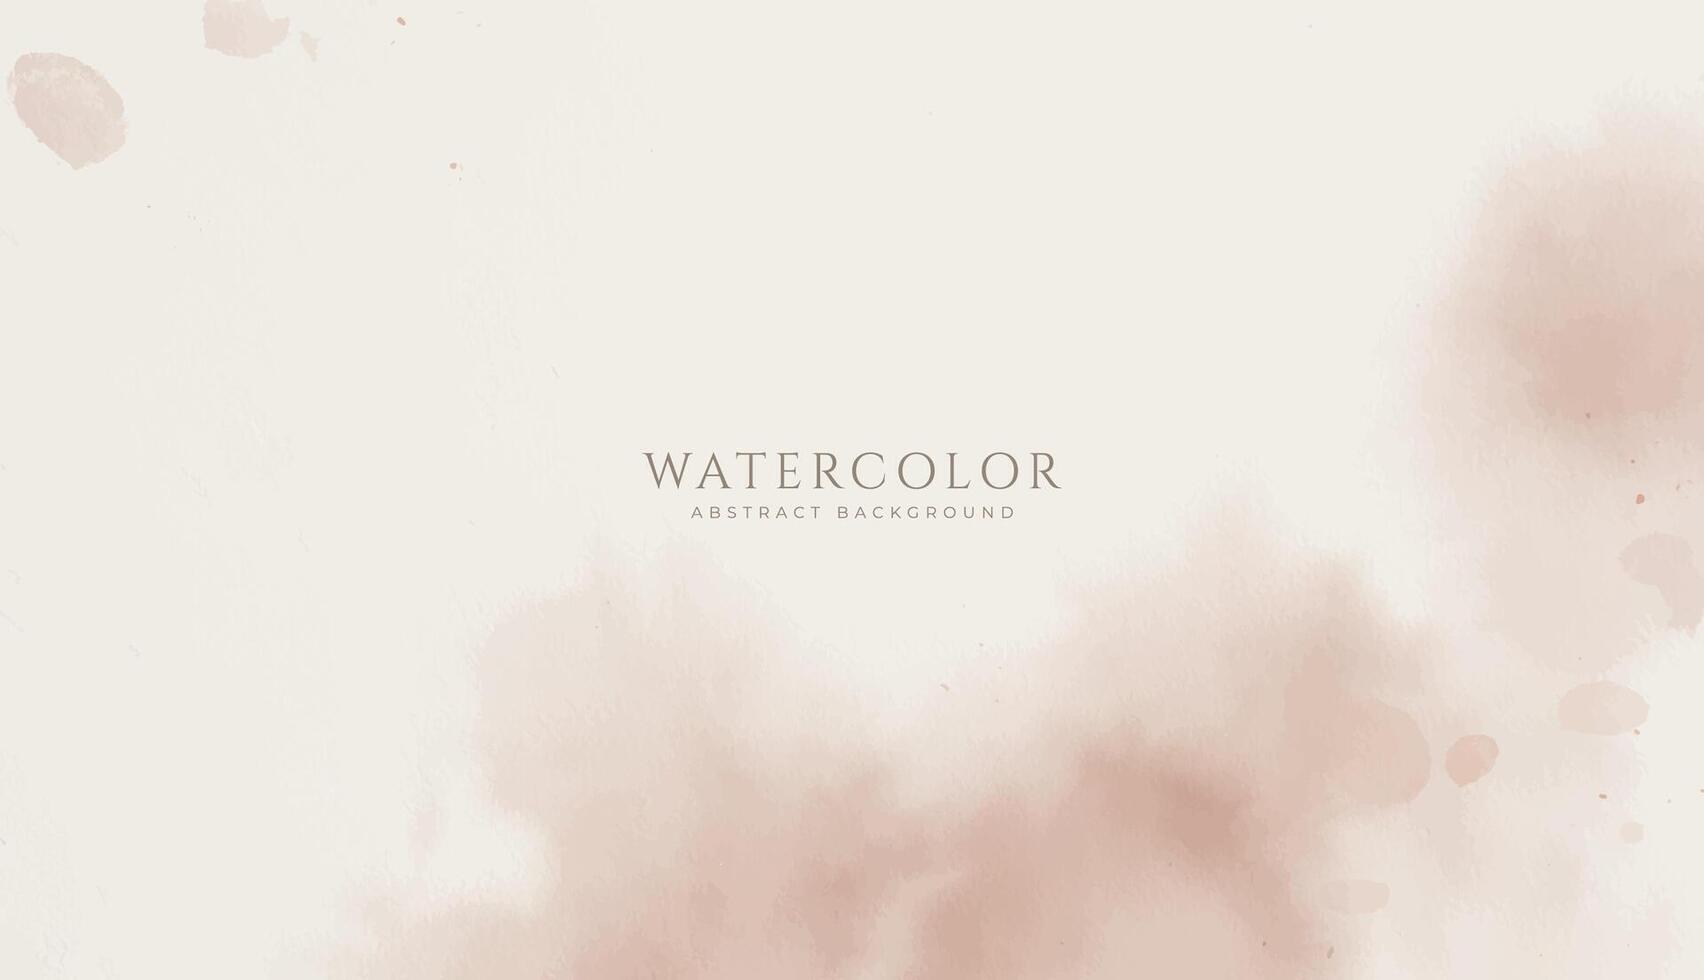 Abstract horizontal watercolor background. Neutral light beige colored empty space background illustration vector